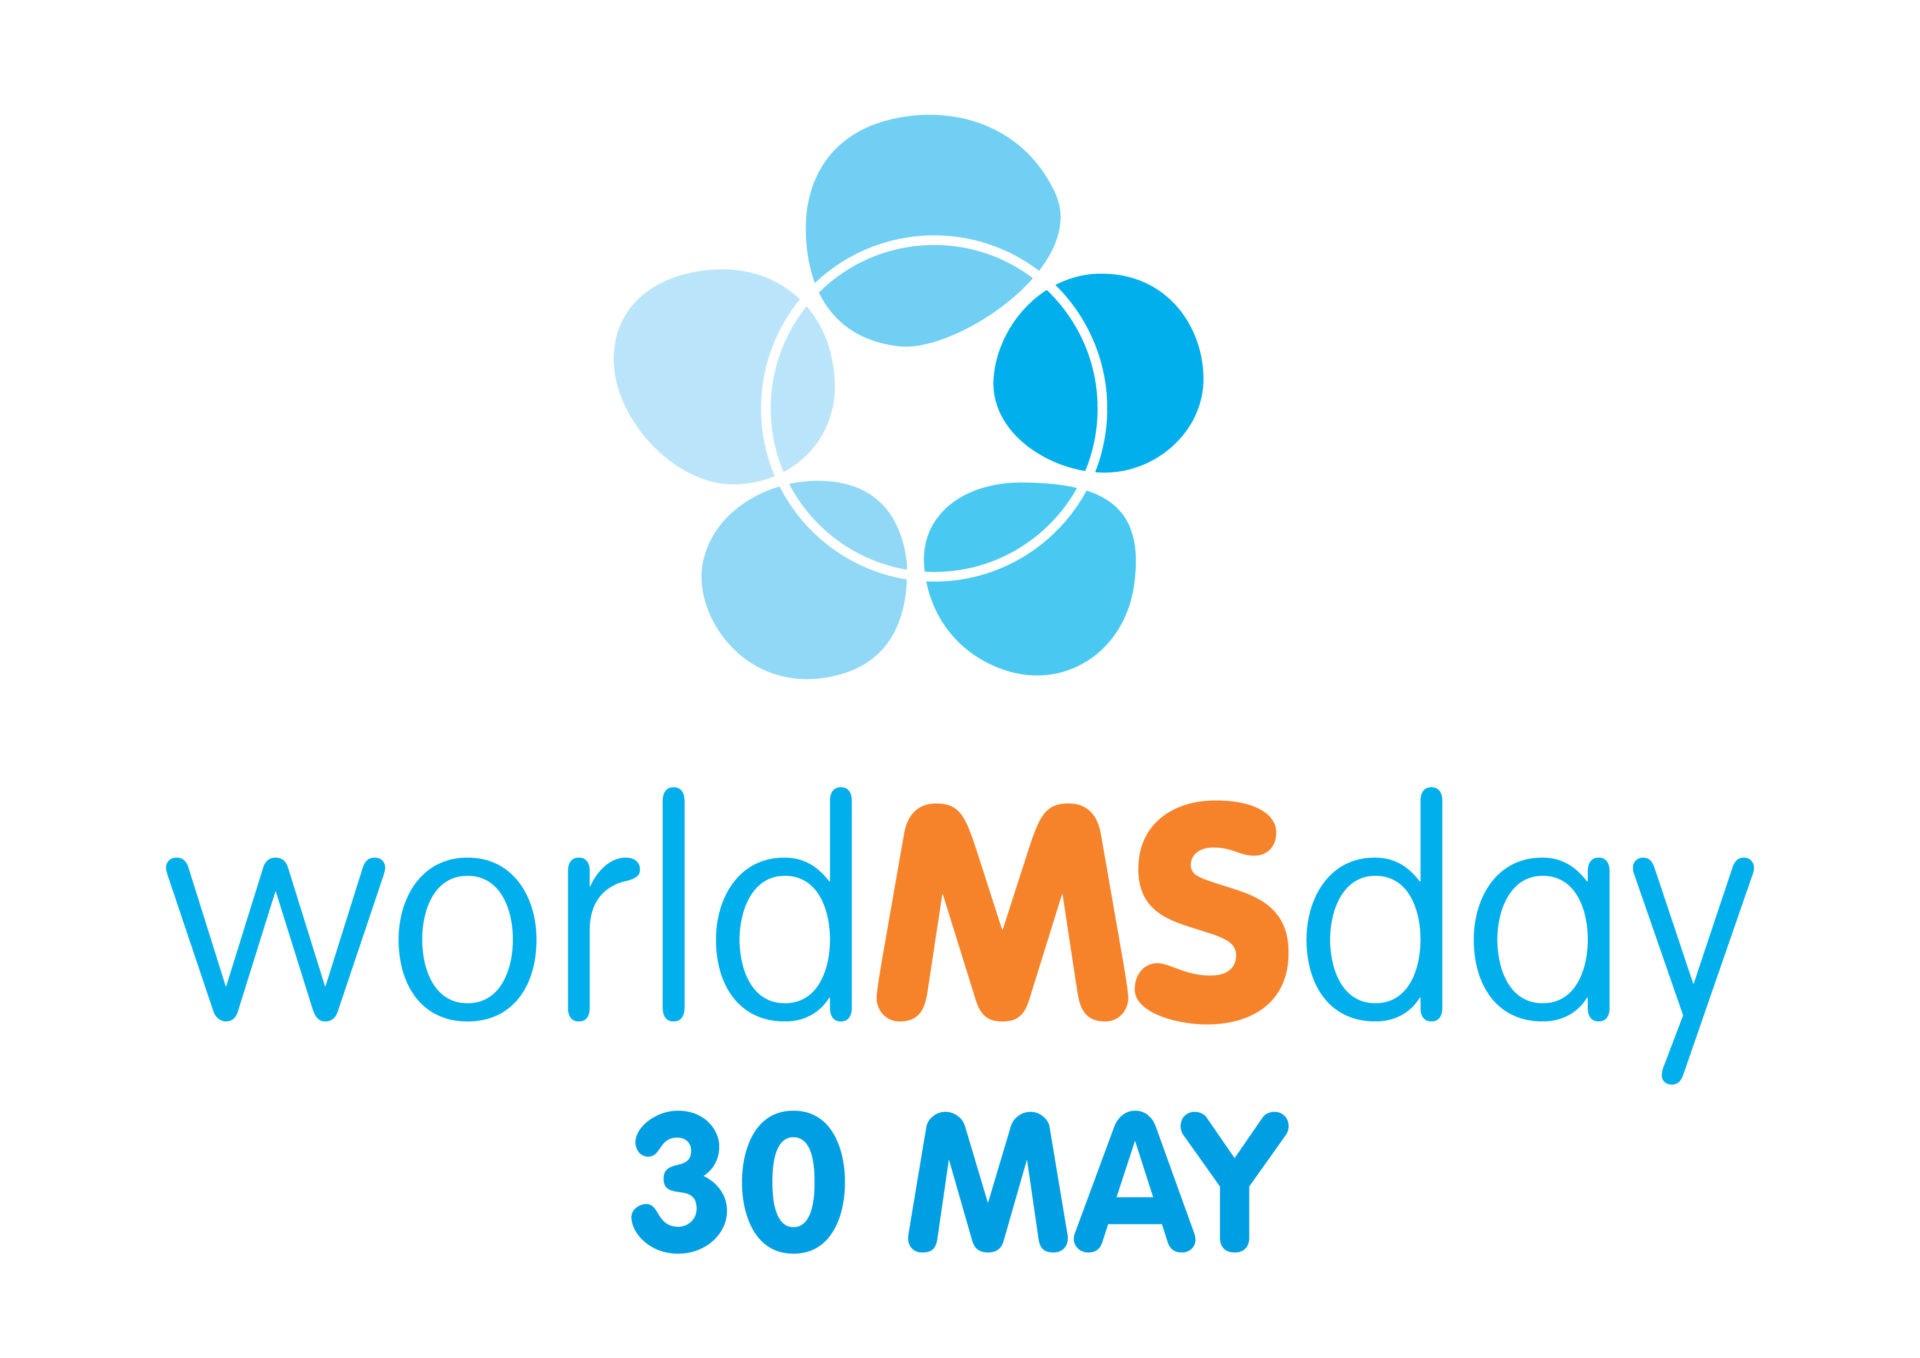 World MS day is celebrated on the 30th of May